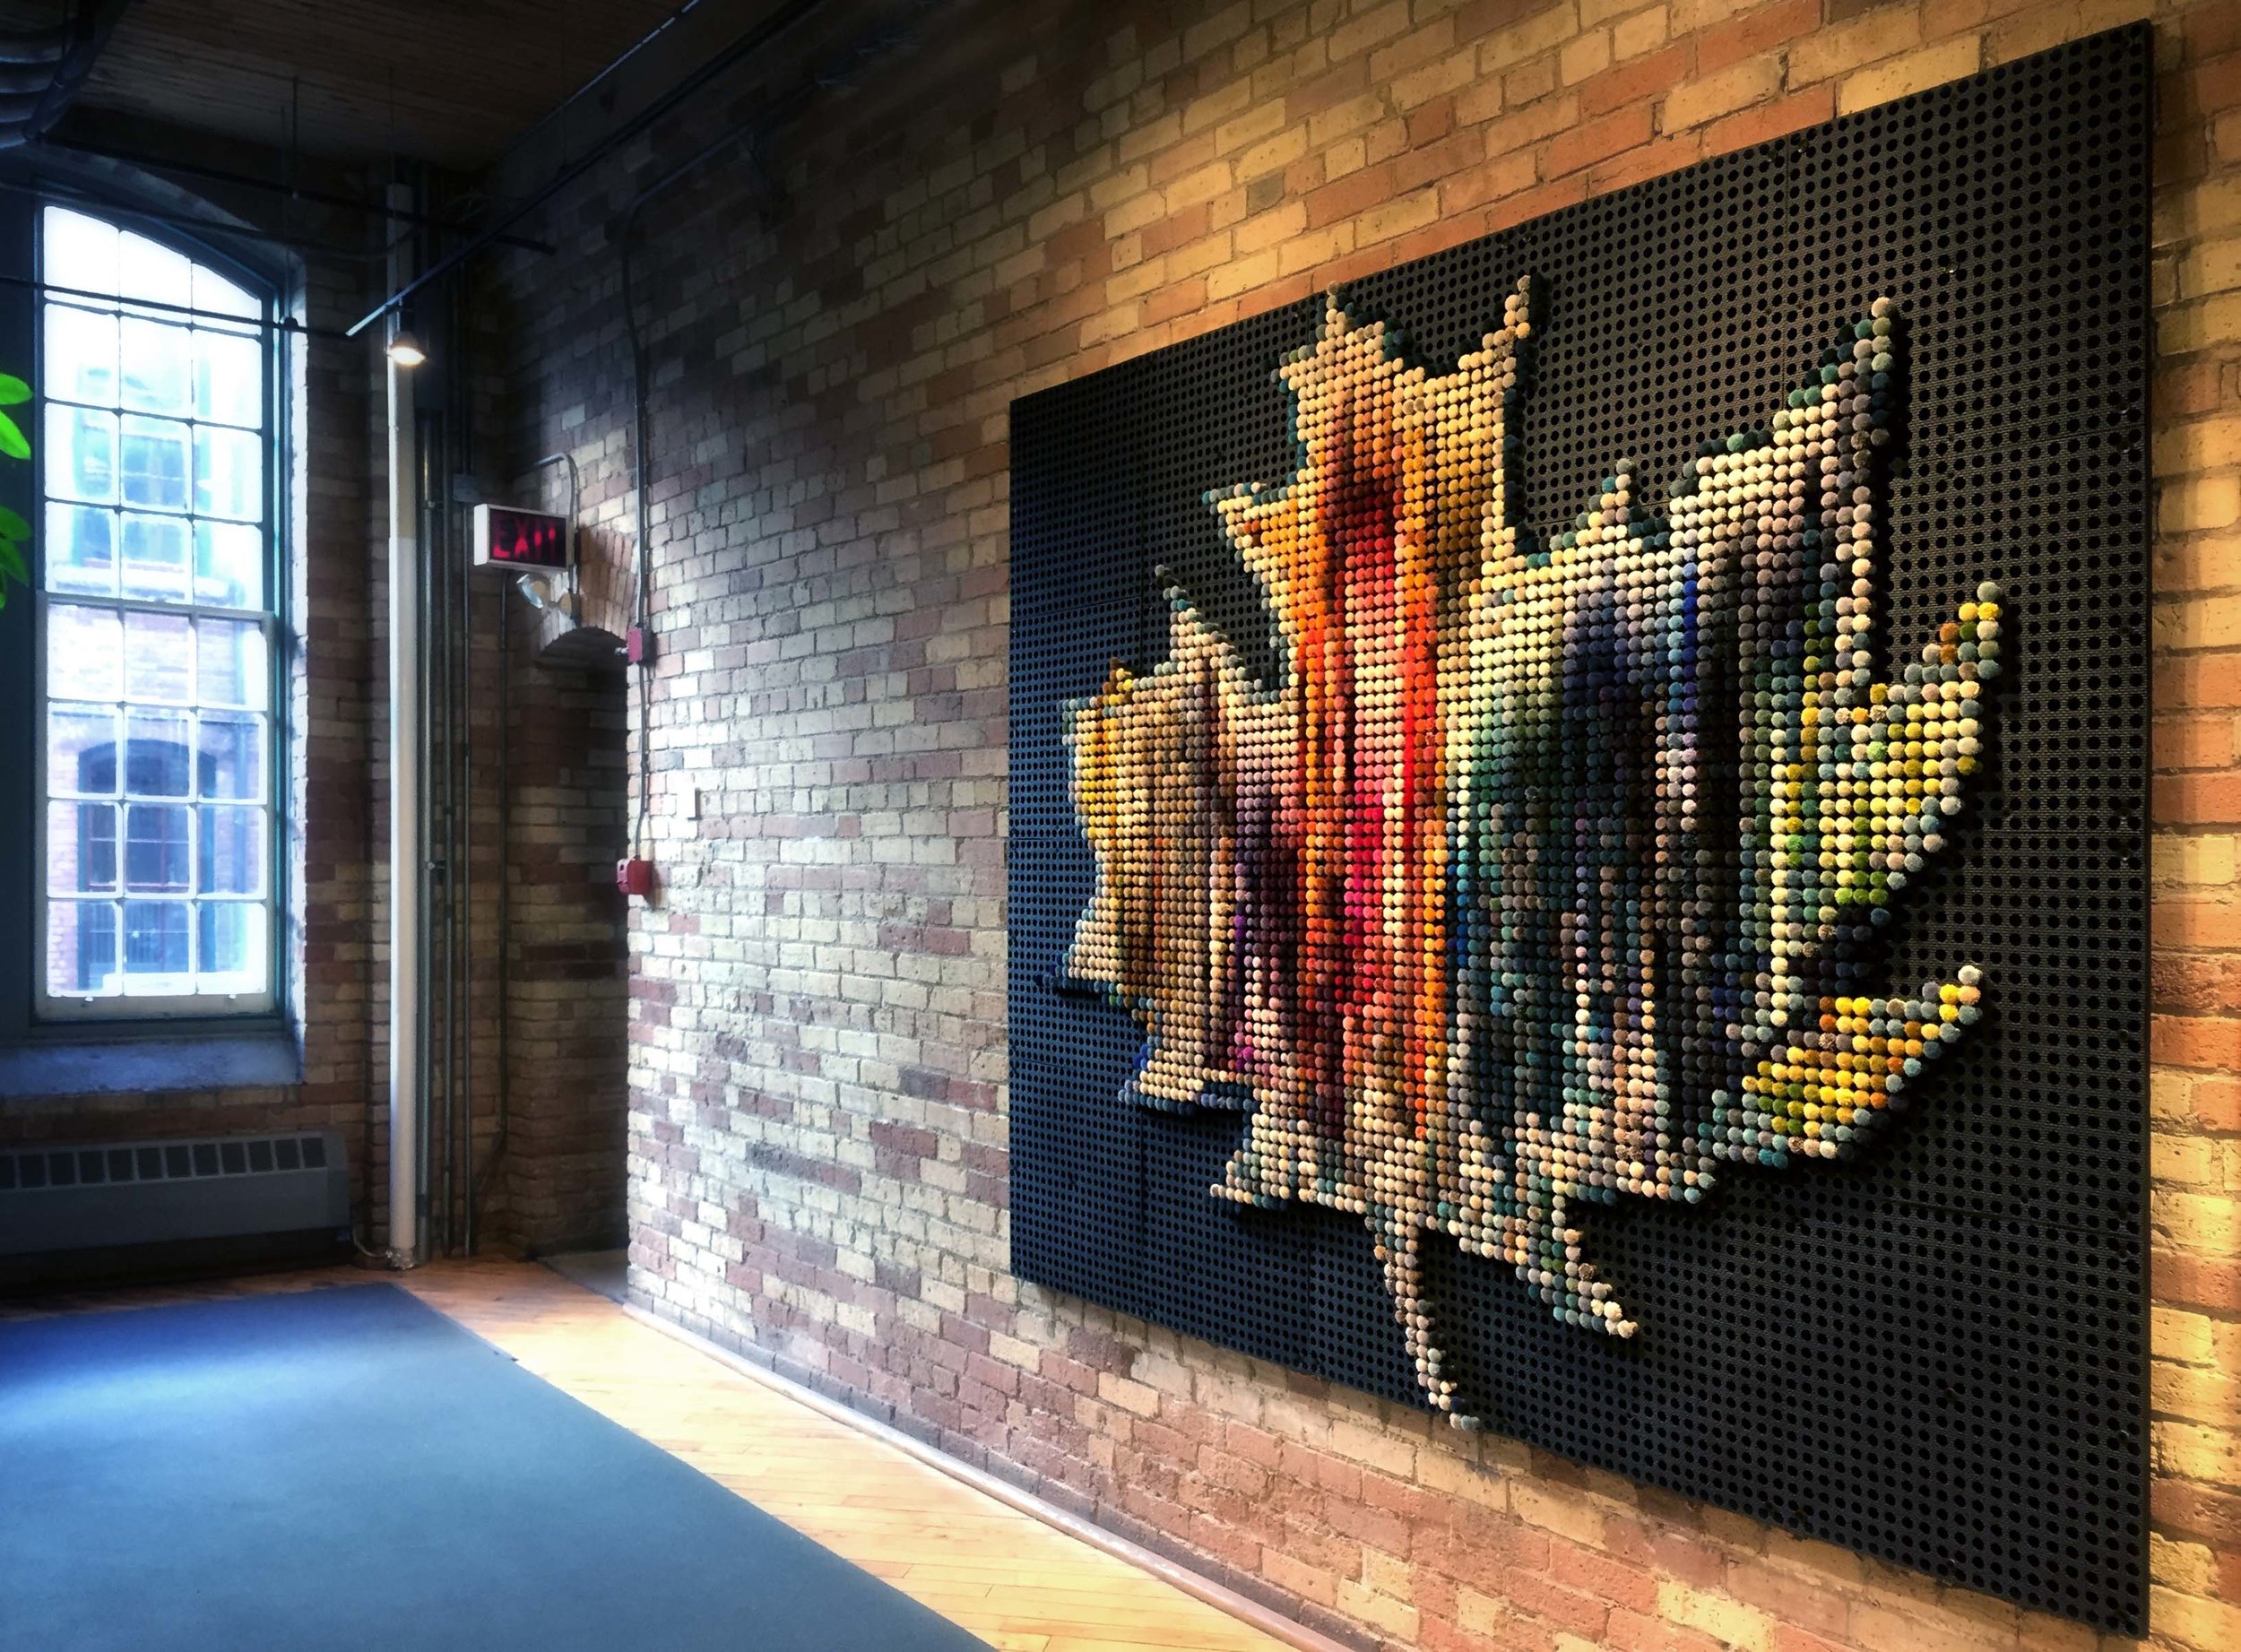  “Canada Leaf” Pom Mosaic™ featured in the front lobby of The Carpet Factory Lofts in Toronto • 2017 